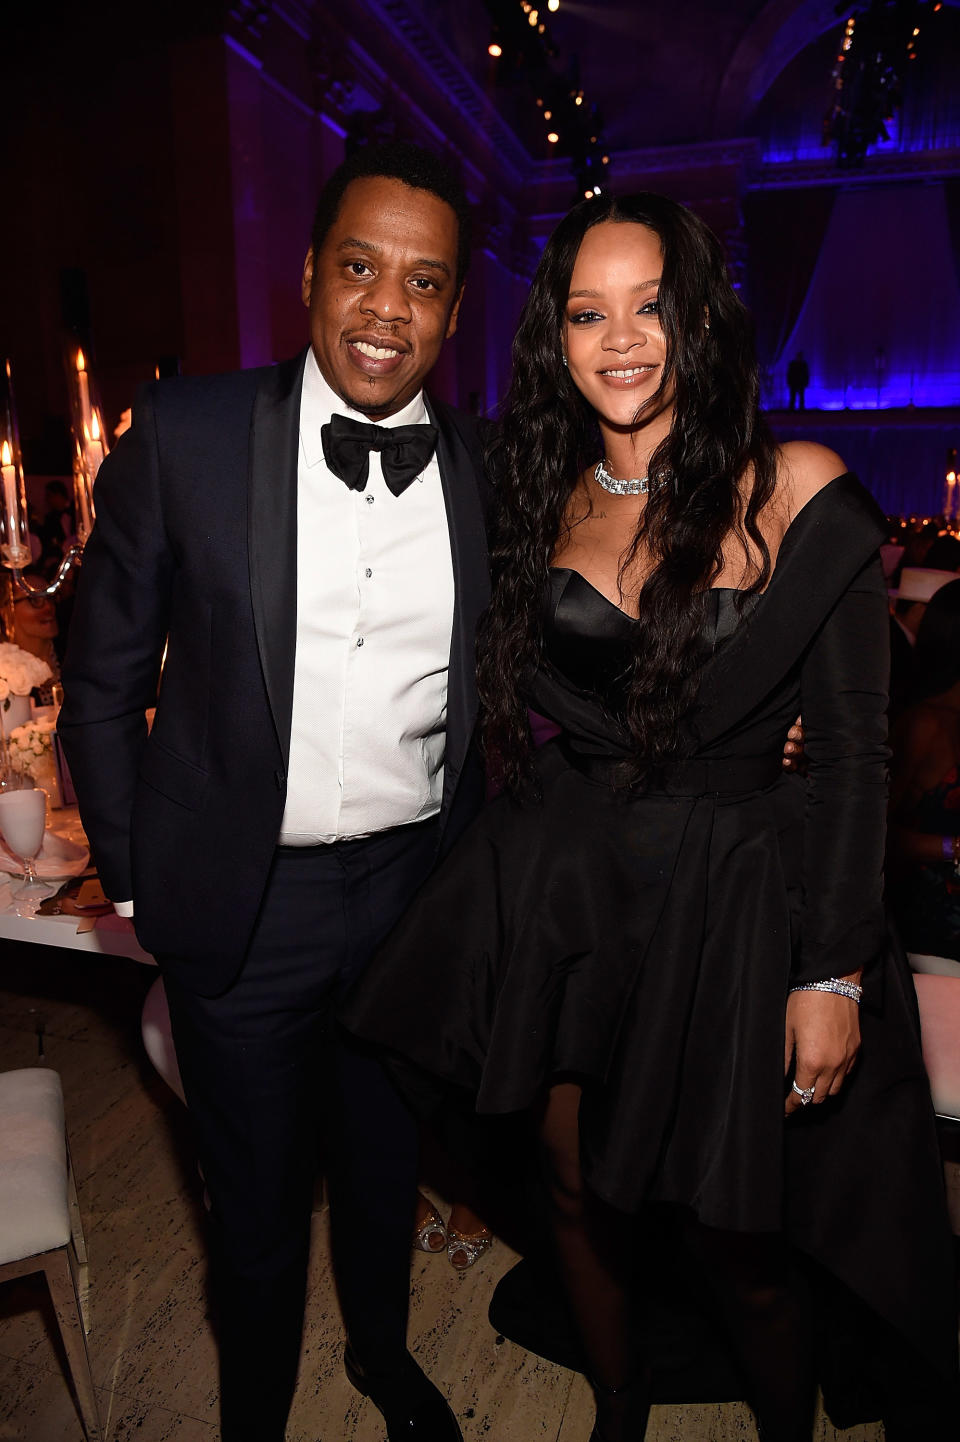 JAY-Z posed with host Rihanna at her 3rd Annual Diamond Ball benefitting the Clara Lionel Foundation at Cipriani Wall Street in NYC on September 14, 2017. (Photo: Kevin Mazur/Getty Images for Clara Lionel Foundation)